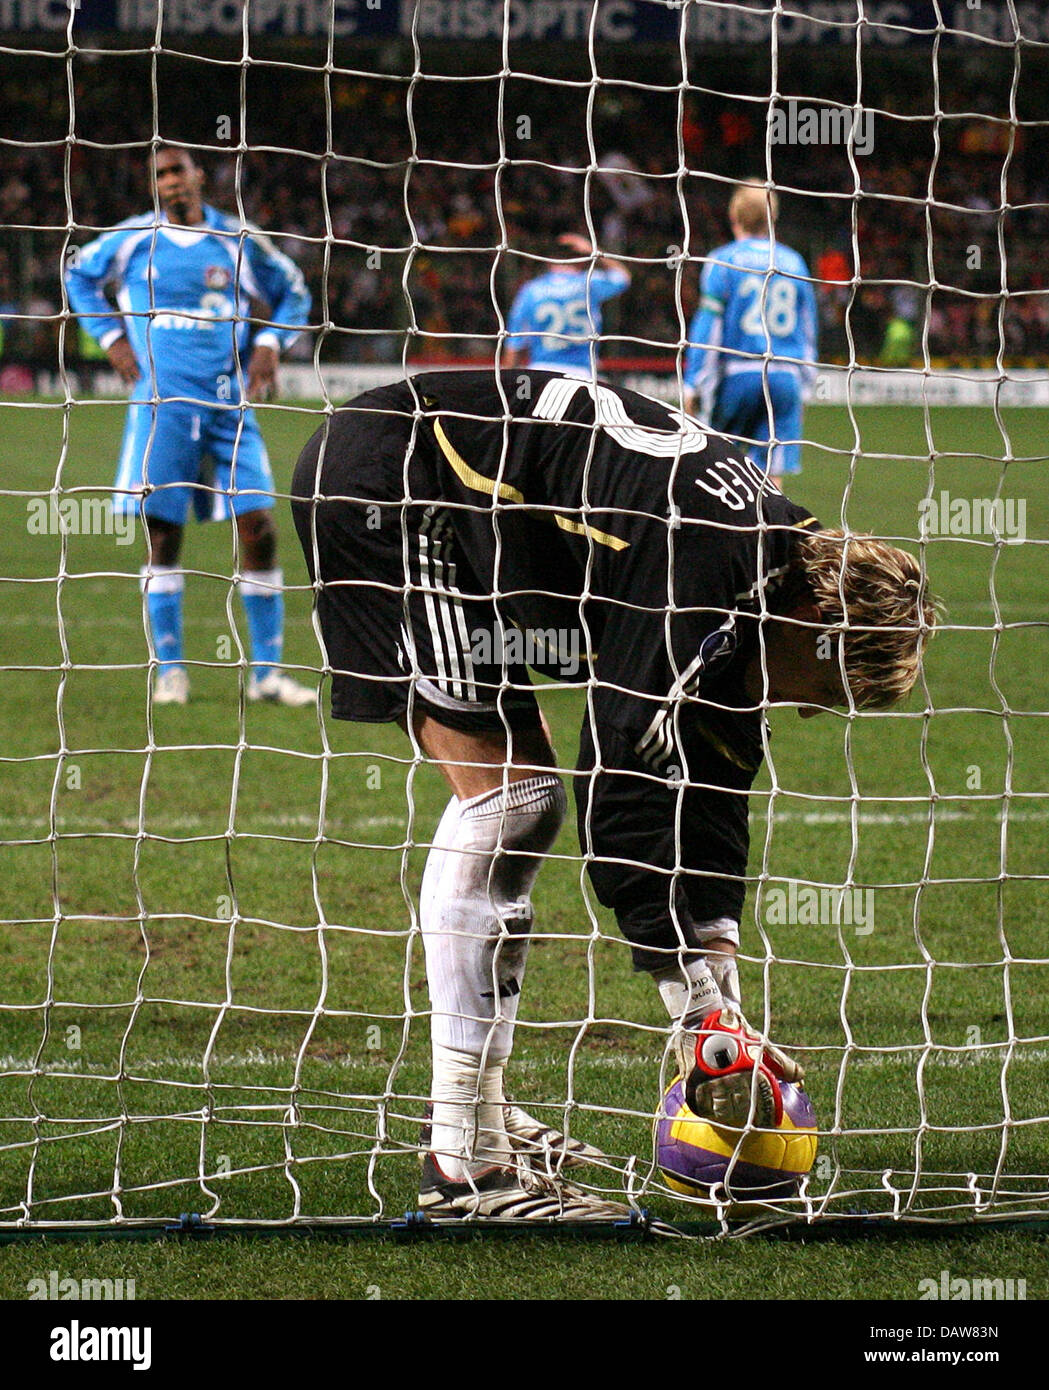 Leverkusen's goalkeeper Rene Adler reaches for the ball disappointedly after Lens' successful penalty shot during the UEFA Cup match RC Lens vs Bayer 04 Leverkusen at Félix-Bollaert Stadium in Lens, France, Thursday 08 March 2007. Leverkusen lost to Lens by 1-2. Photo: Felix Heyder Stock Photo